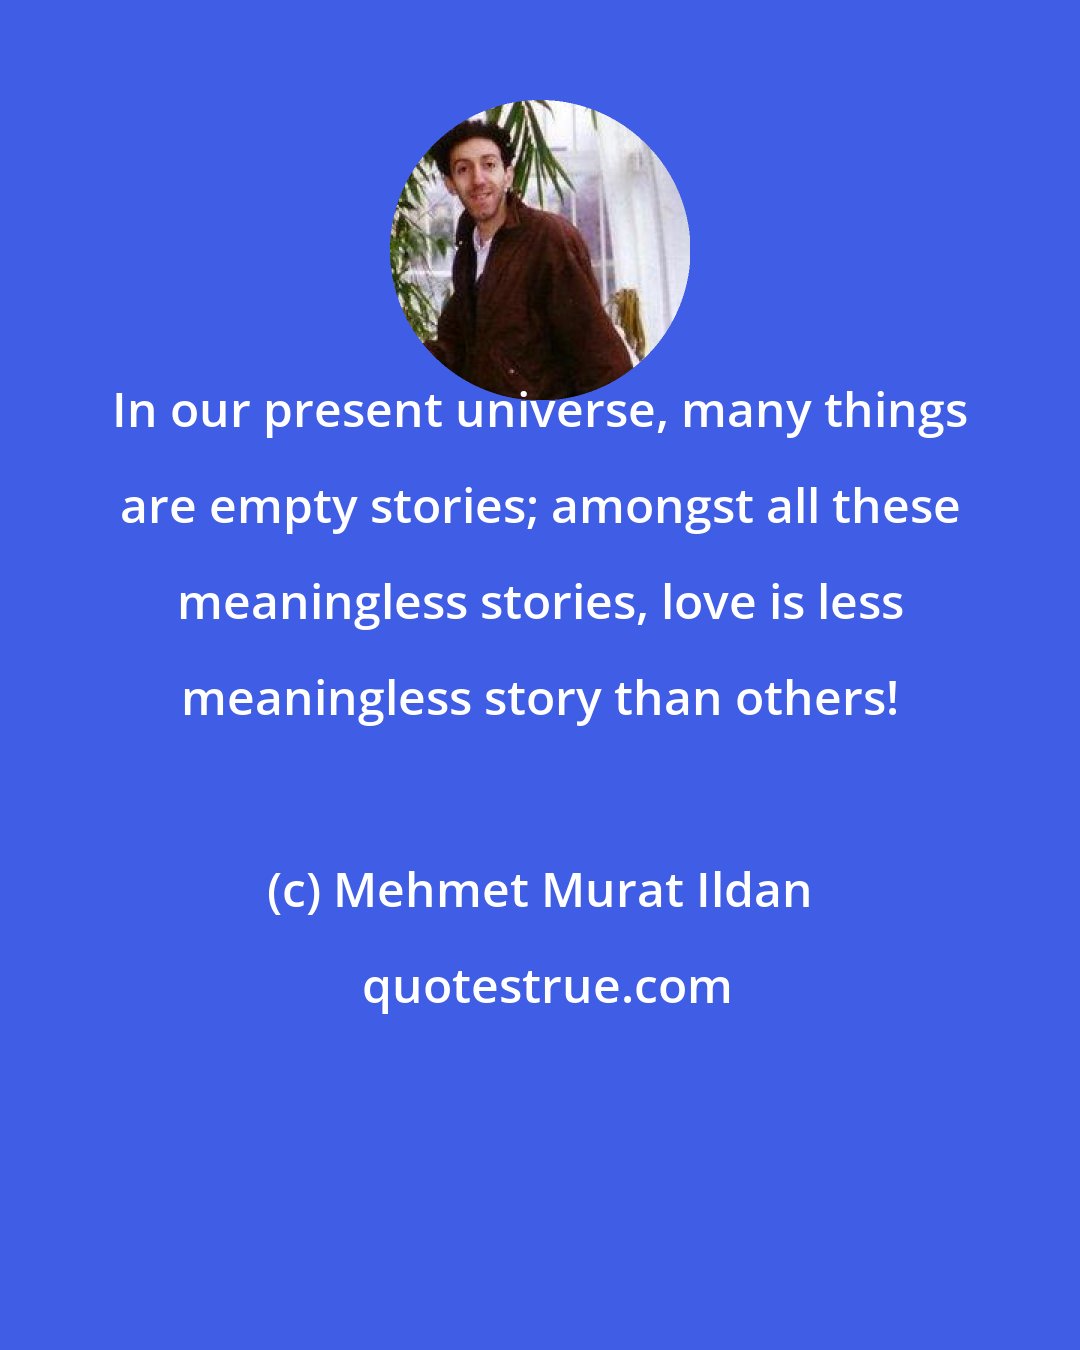 Mehmet Murat Ildan: In our present universe, many things are empty stories; amongst all these meaningless stories, love is less meaningless story than others!